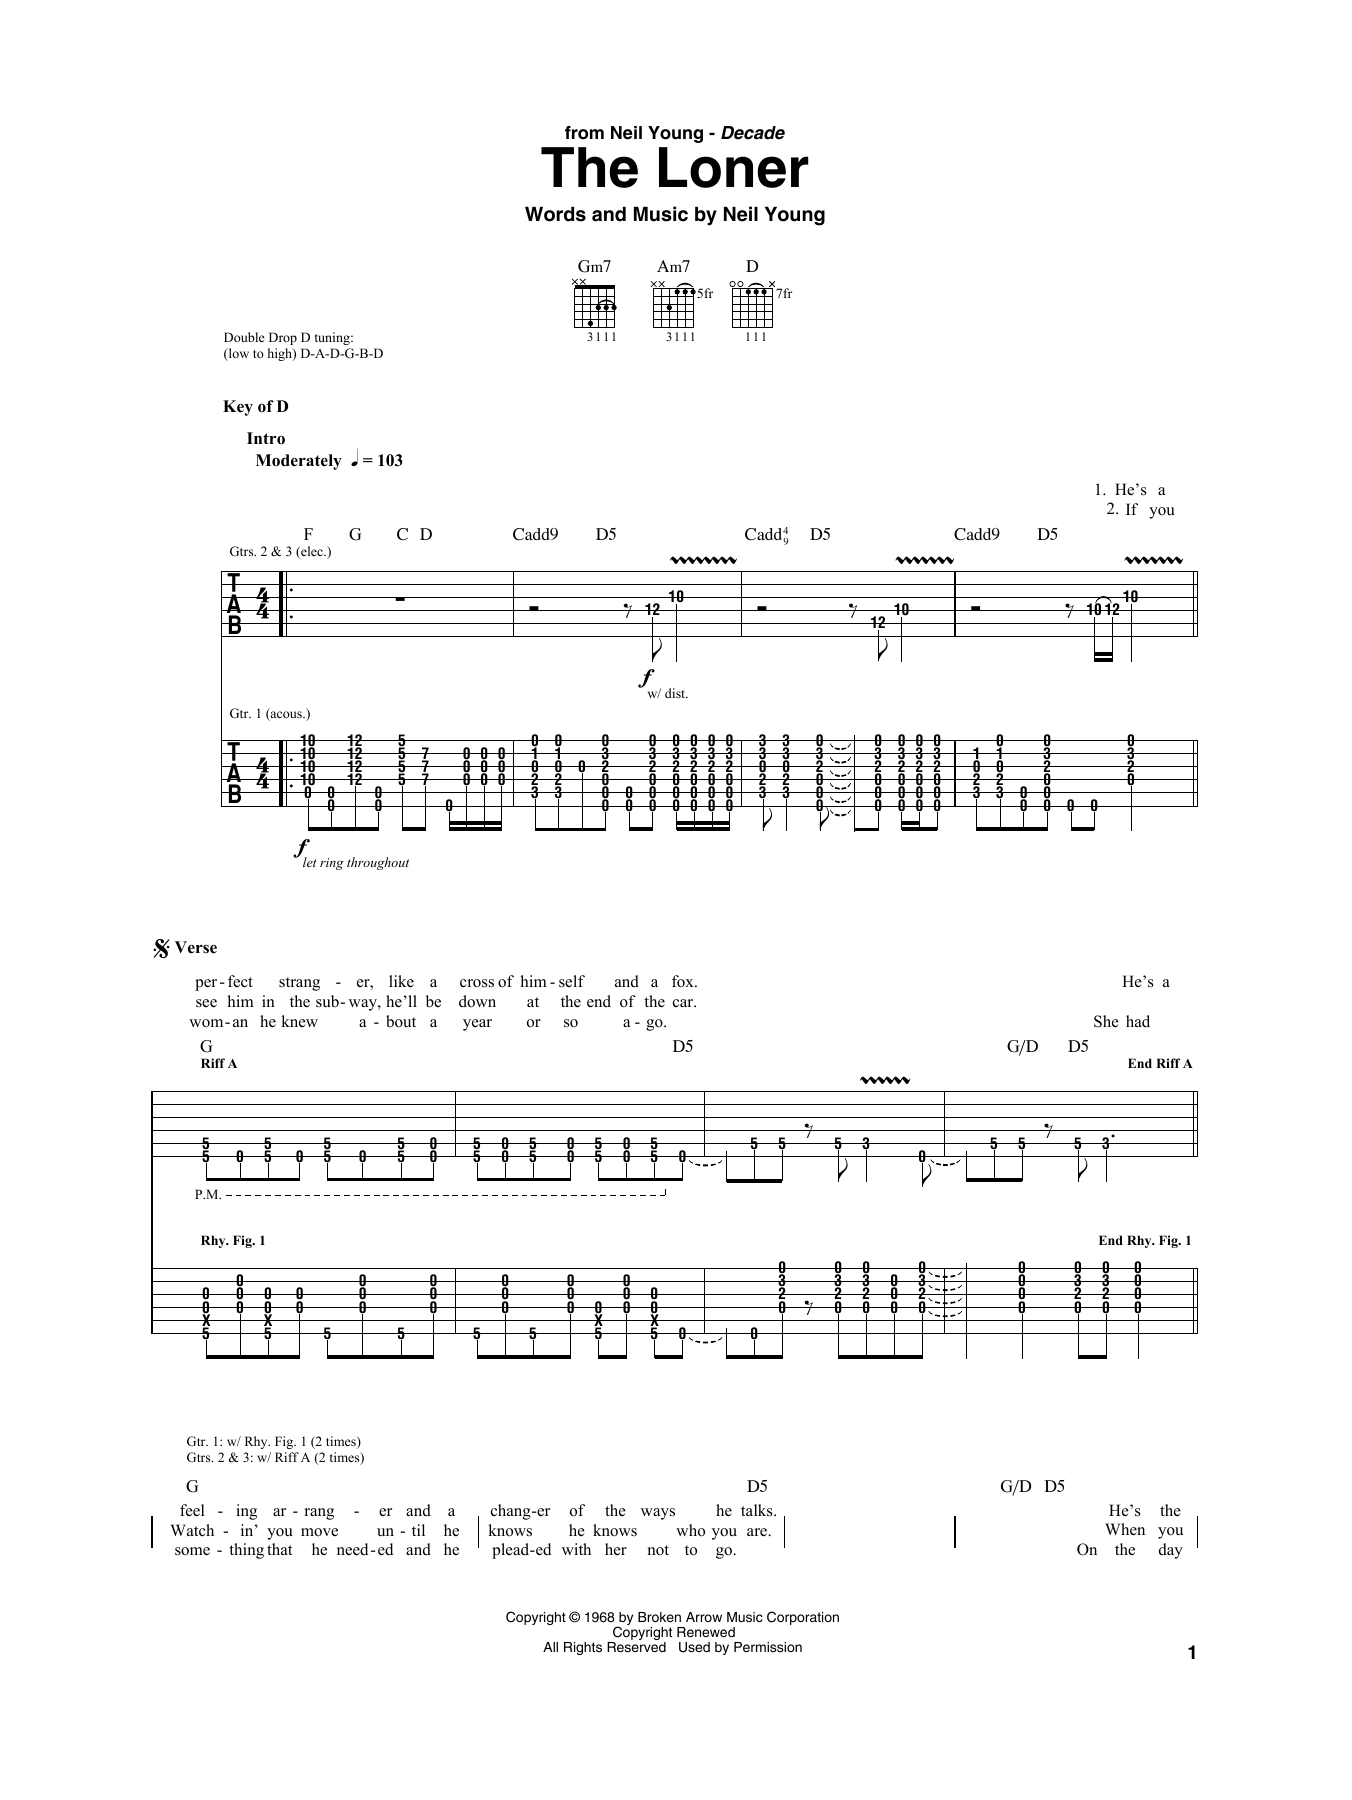 Download Neil Young The Loner Sheet Music